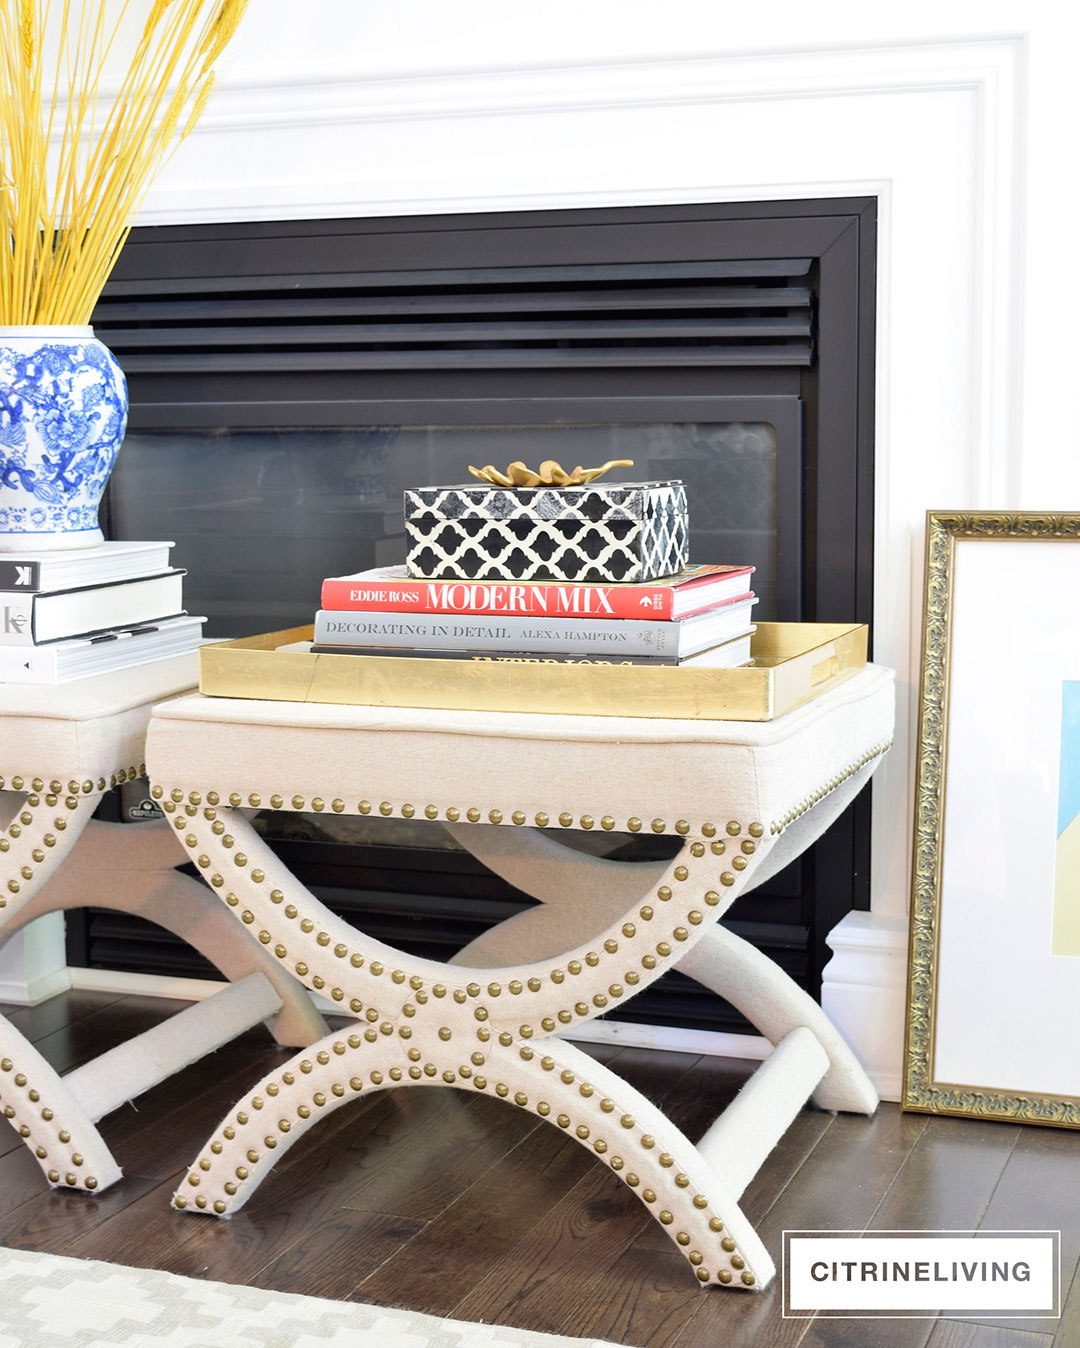 Decorating and styling with trays